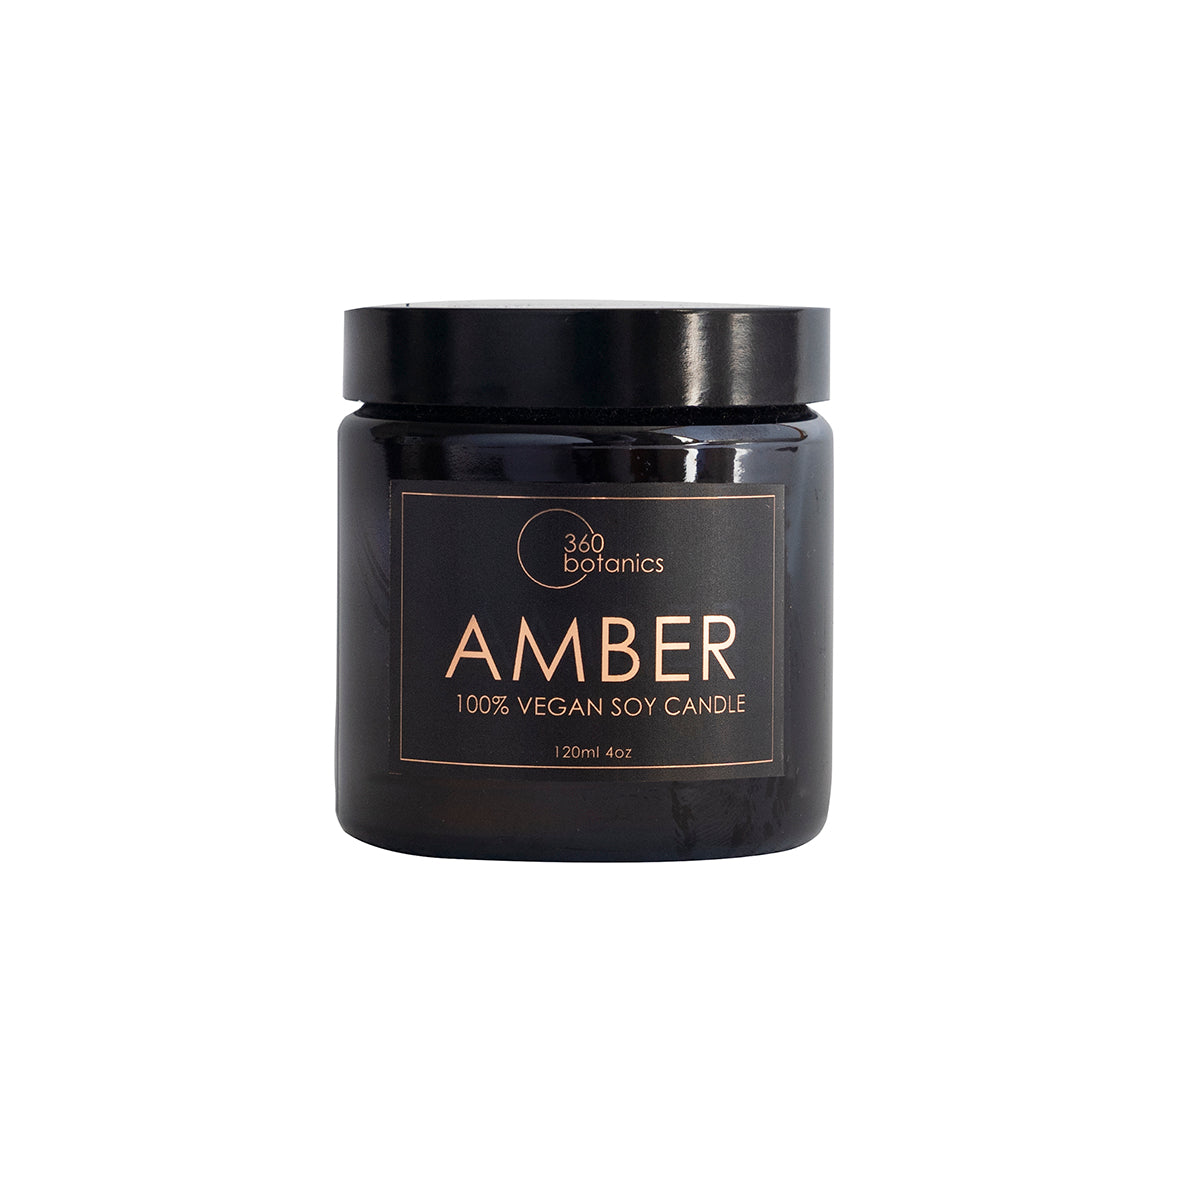  A 120ml 360 Botanics Amber candle, labeled as 100% vegan soy candle, with elegant gold and white text on a sleek black jar.